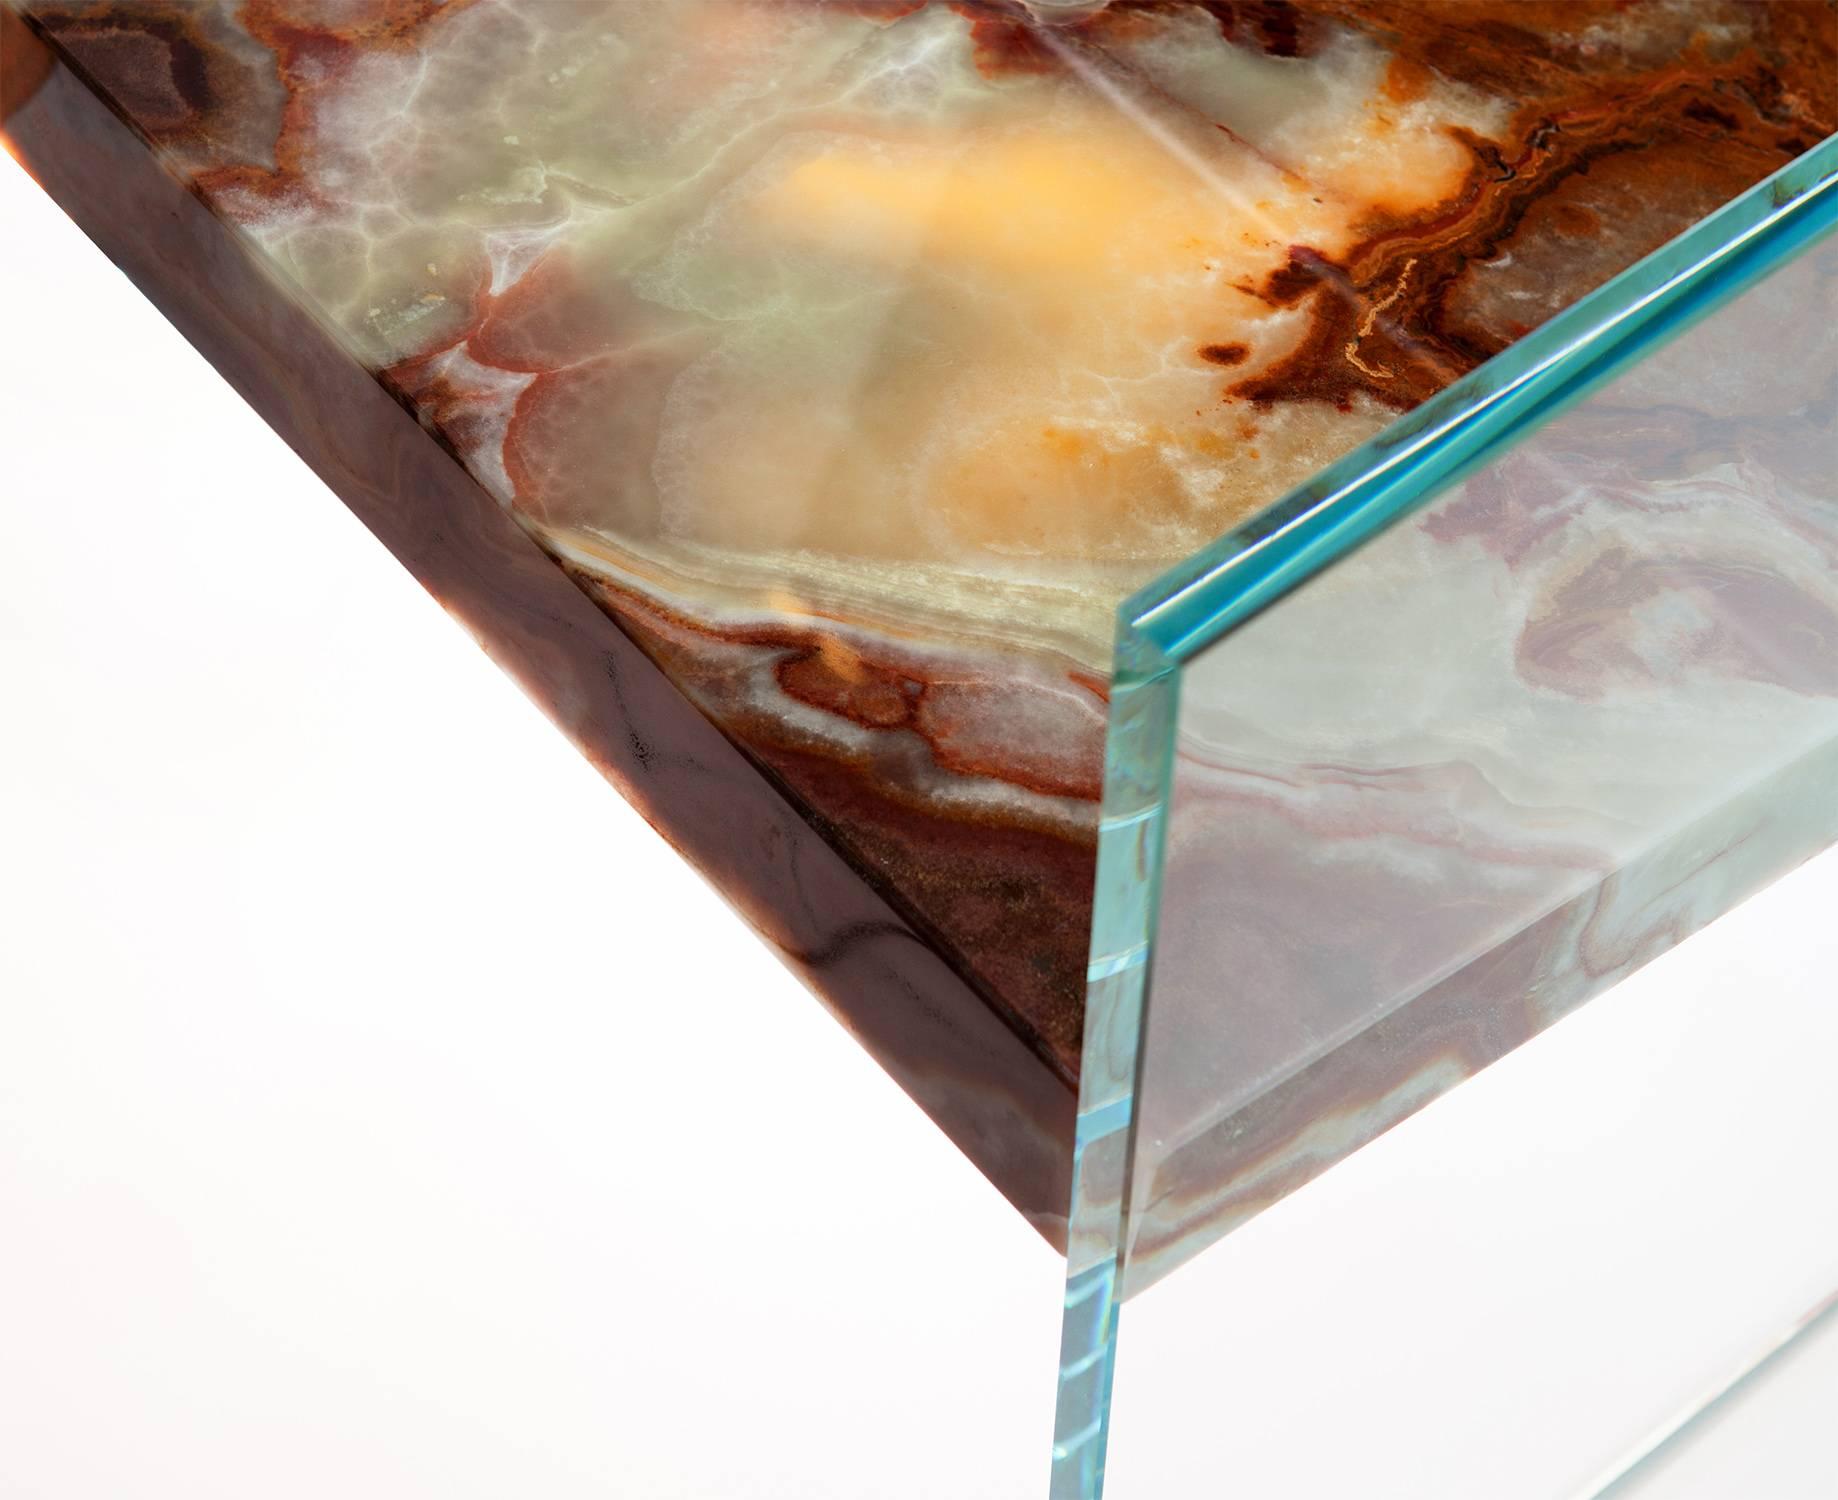 Limited edition of four made of glass and green-brown onyx

Fragility and stability are essential to the experience of the Tension collection. Quinlan Osborn creates pieces that look surprisingly stable, simultaneously delicate and substantial,